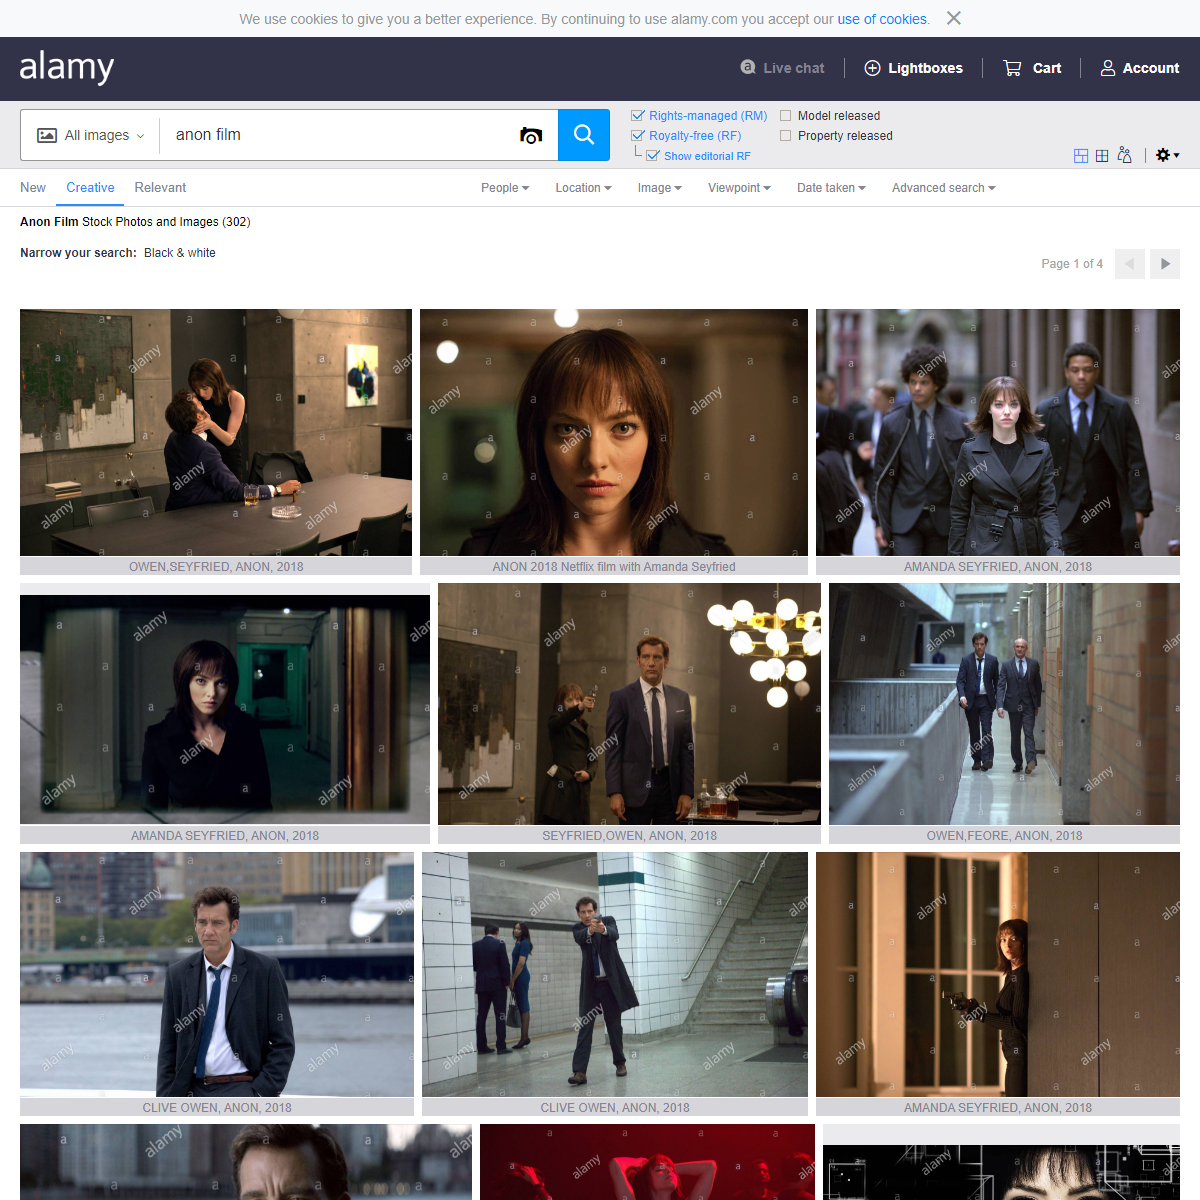 A complete backup of https://www.alamy.com/stock-photo/anon-film.html